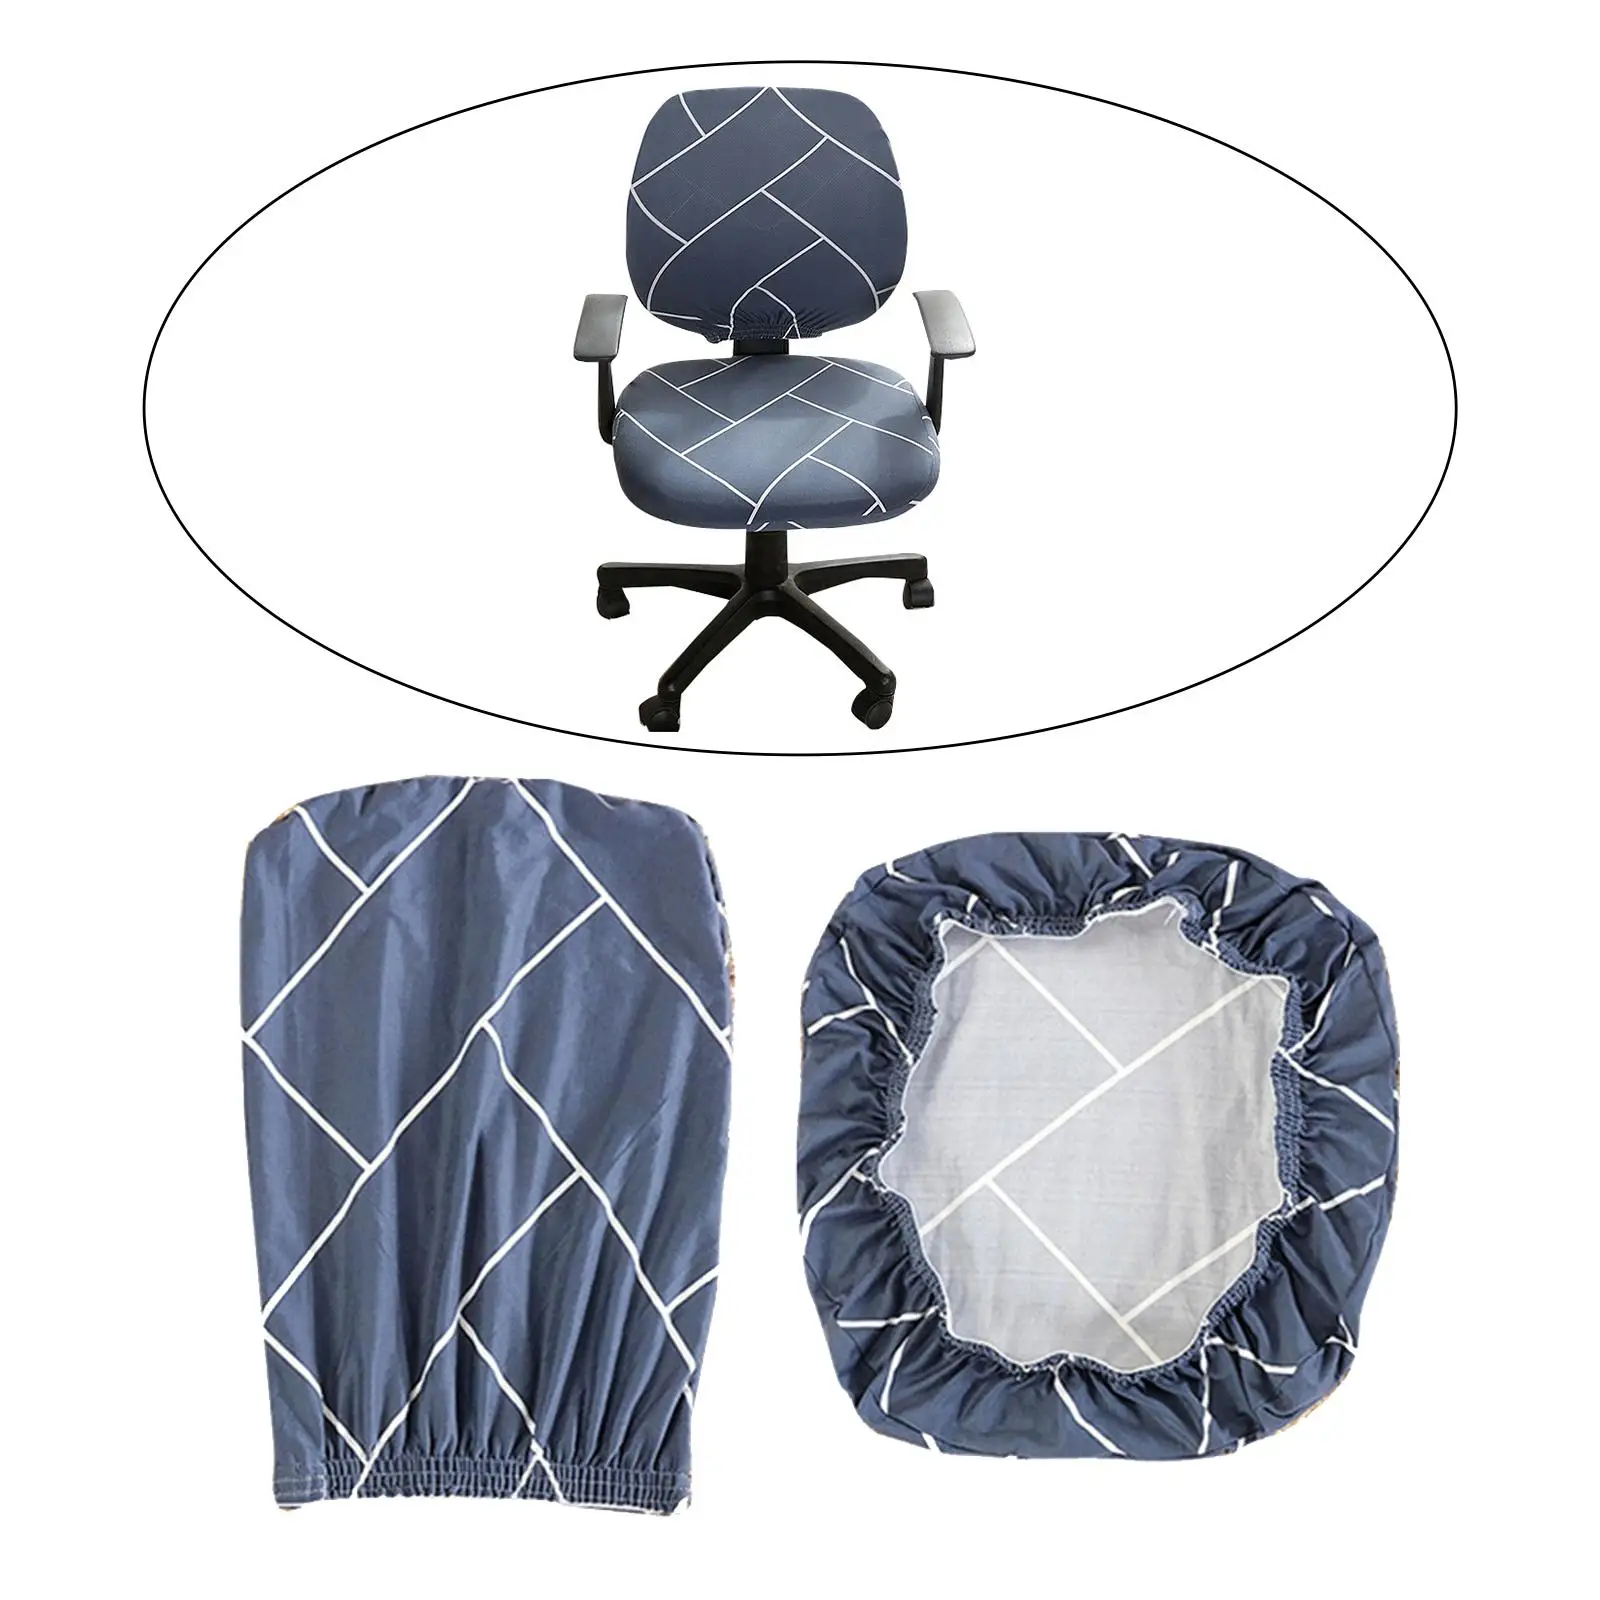 Removable Rotating Chair Cover Furniture Protector Dustproof Polyester Washable Rotating Chair Slipcover for Office Chair